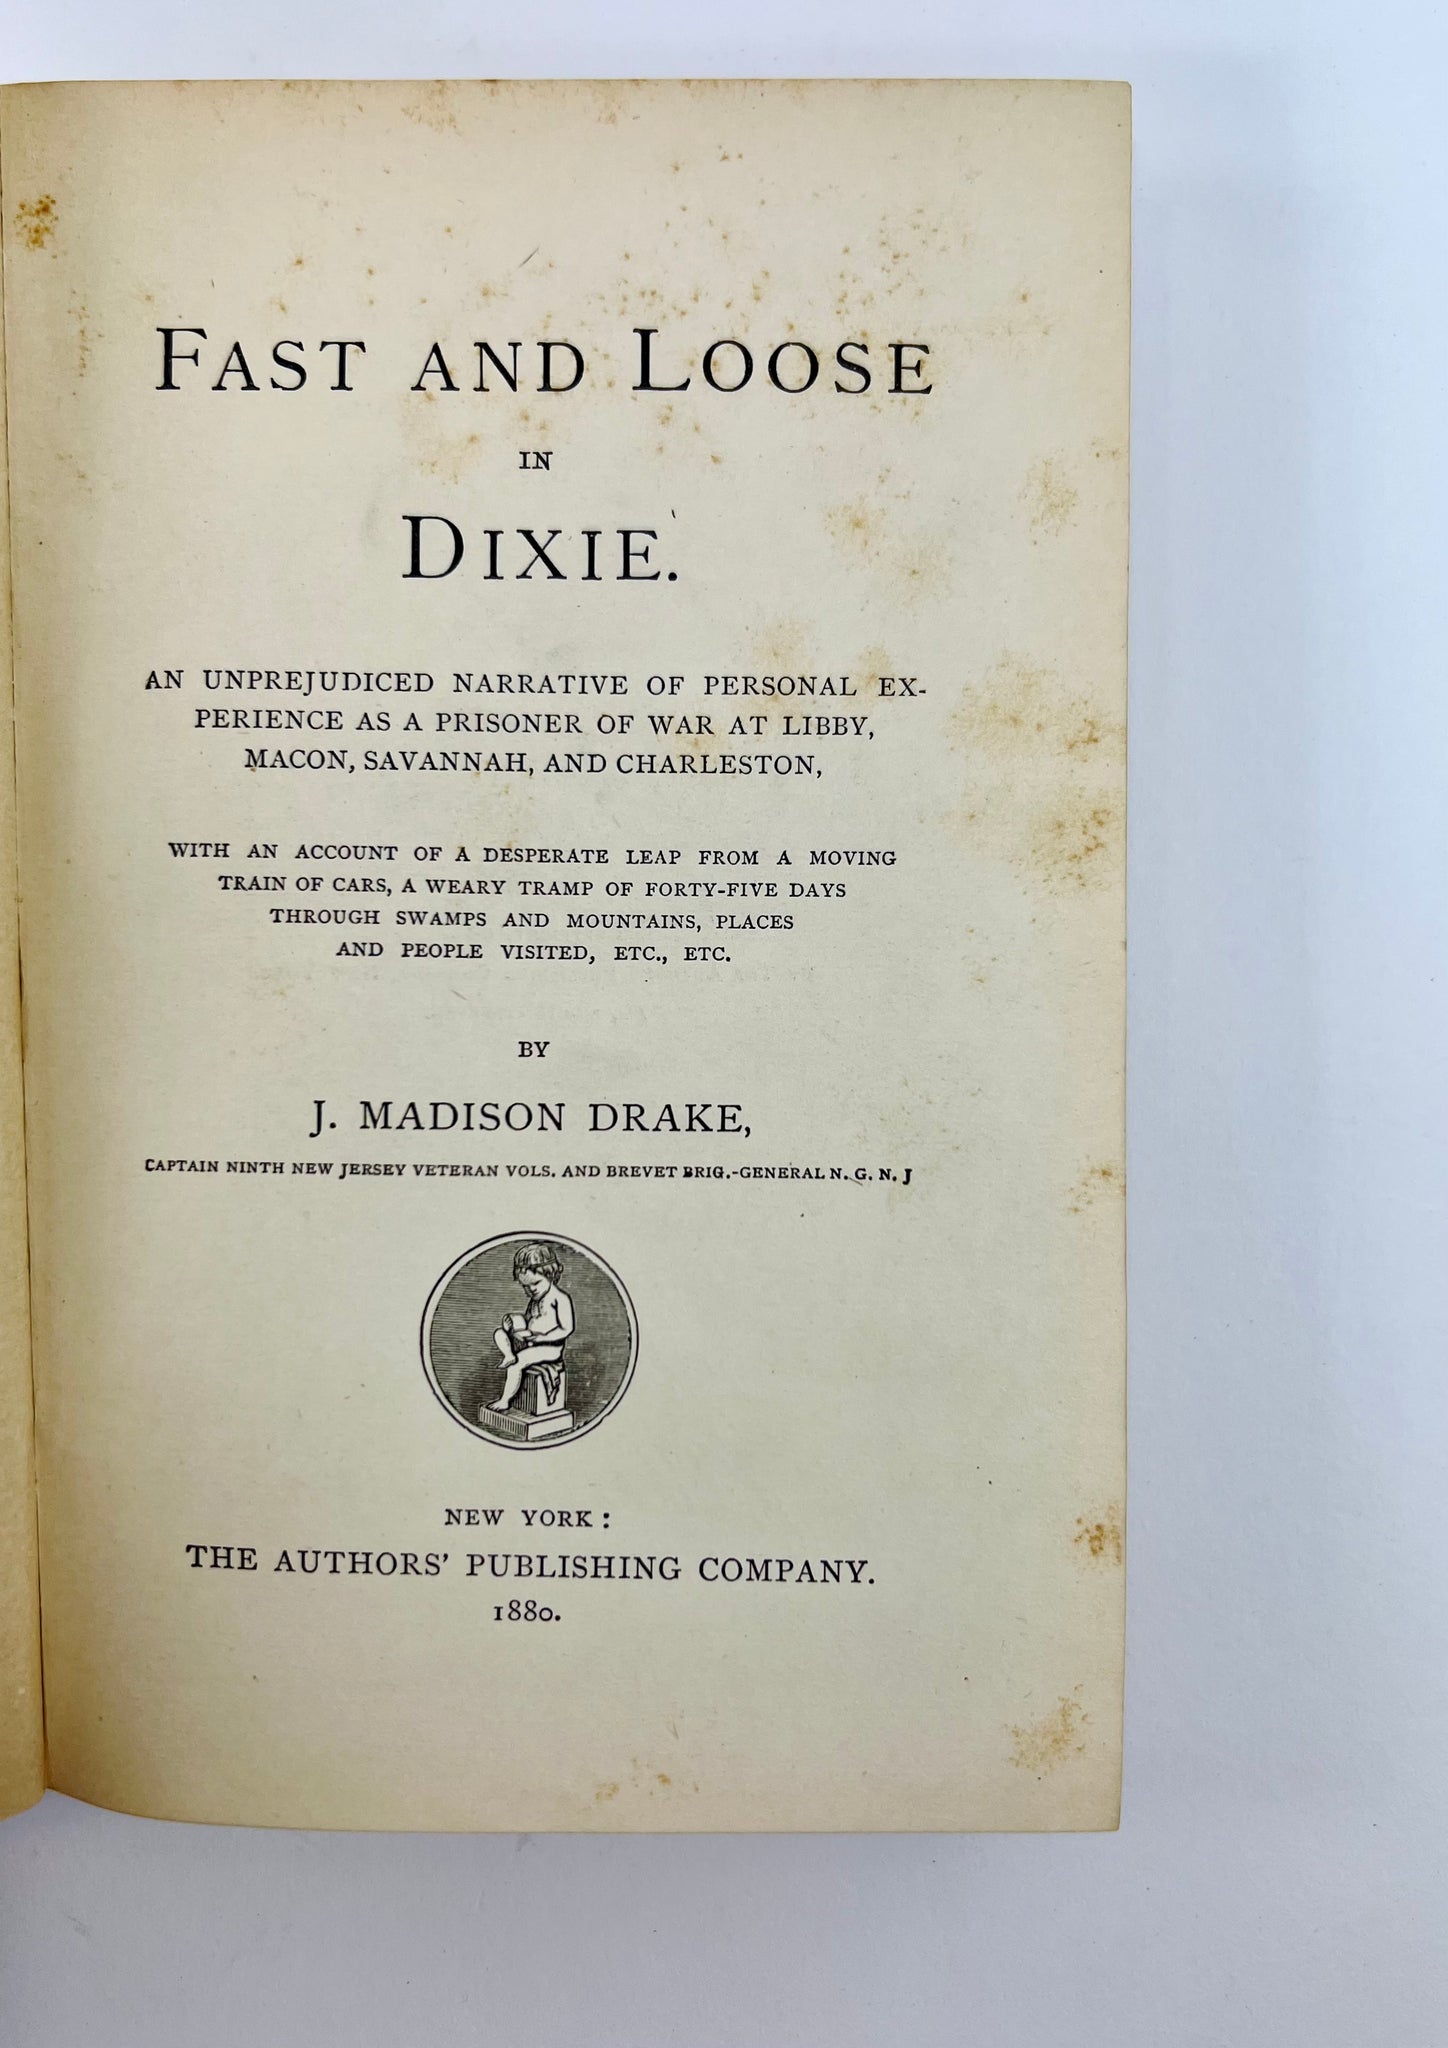 DRAKE, James Madison. Fast and Loose in Dixie.